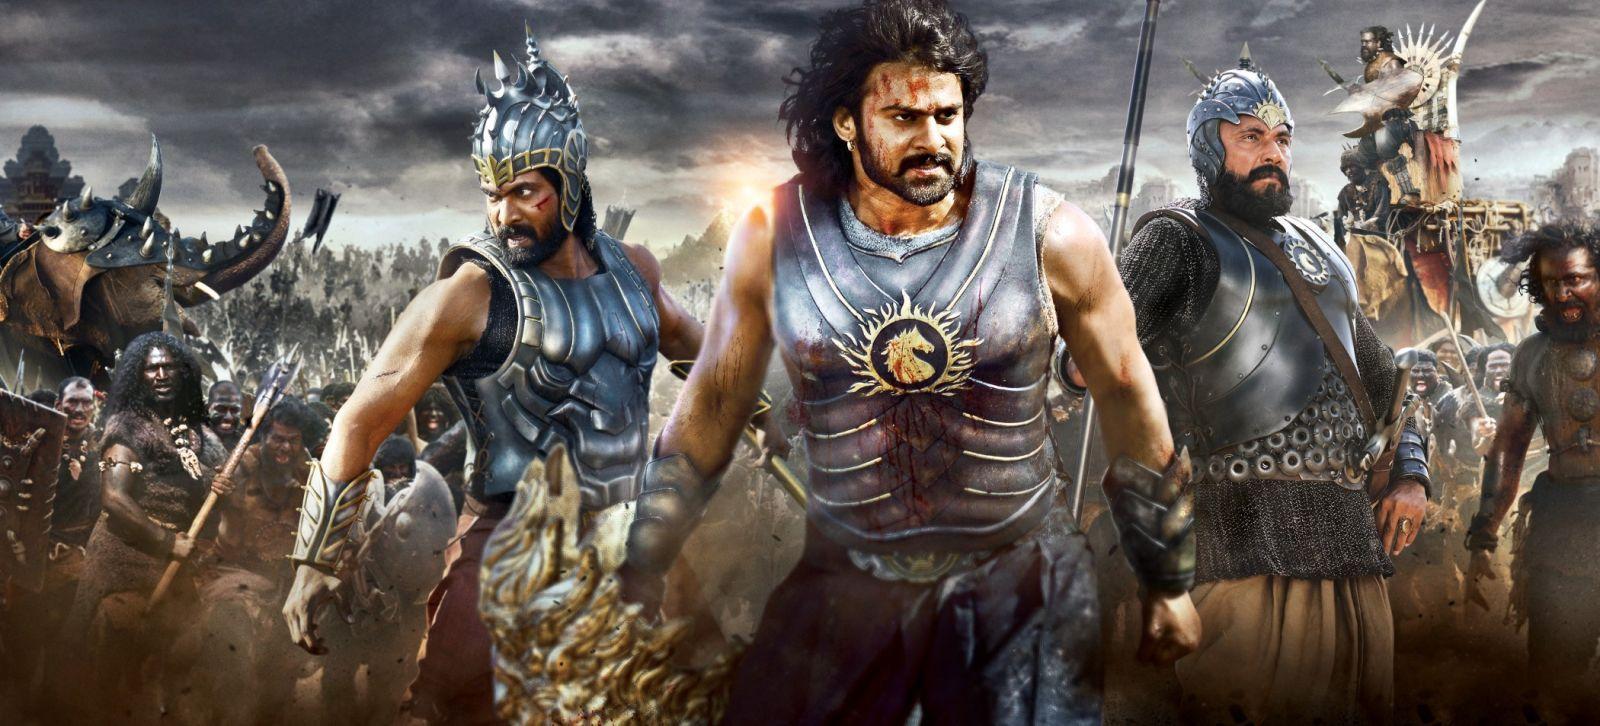 1920x1080 Prabhas Baahubali Laptop Full HD 1080P HD 4k Wallpapers Images  Backgrounds Photos and Pictures